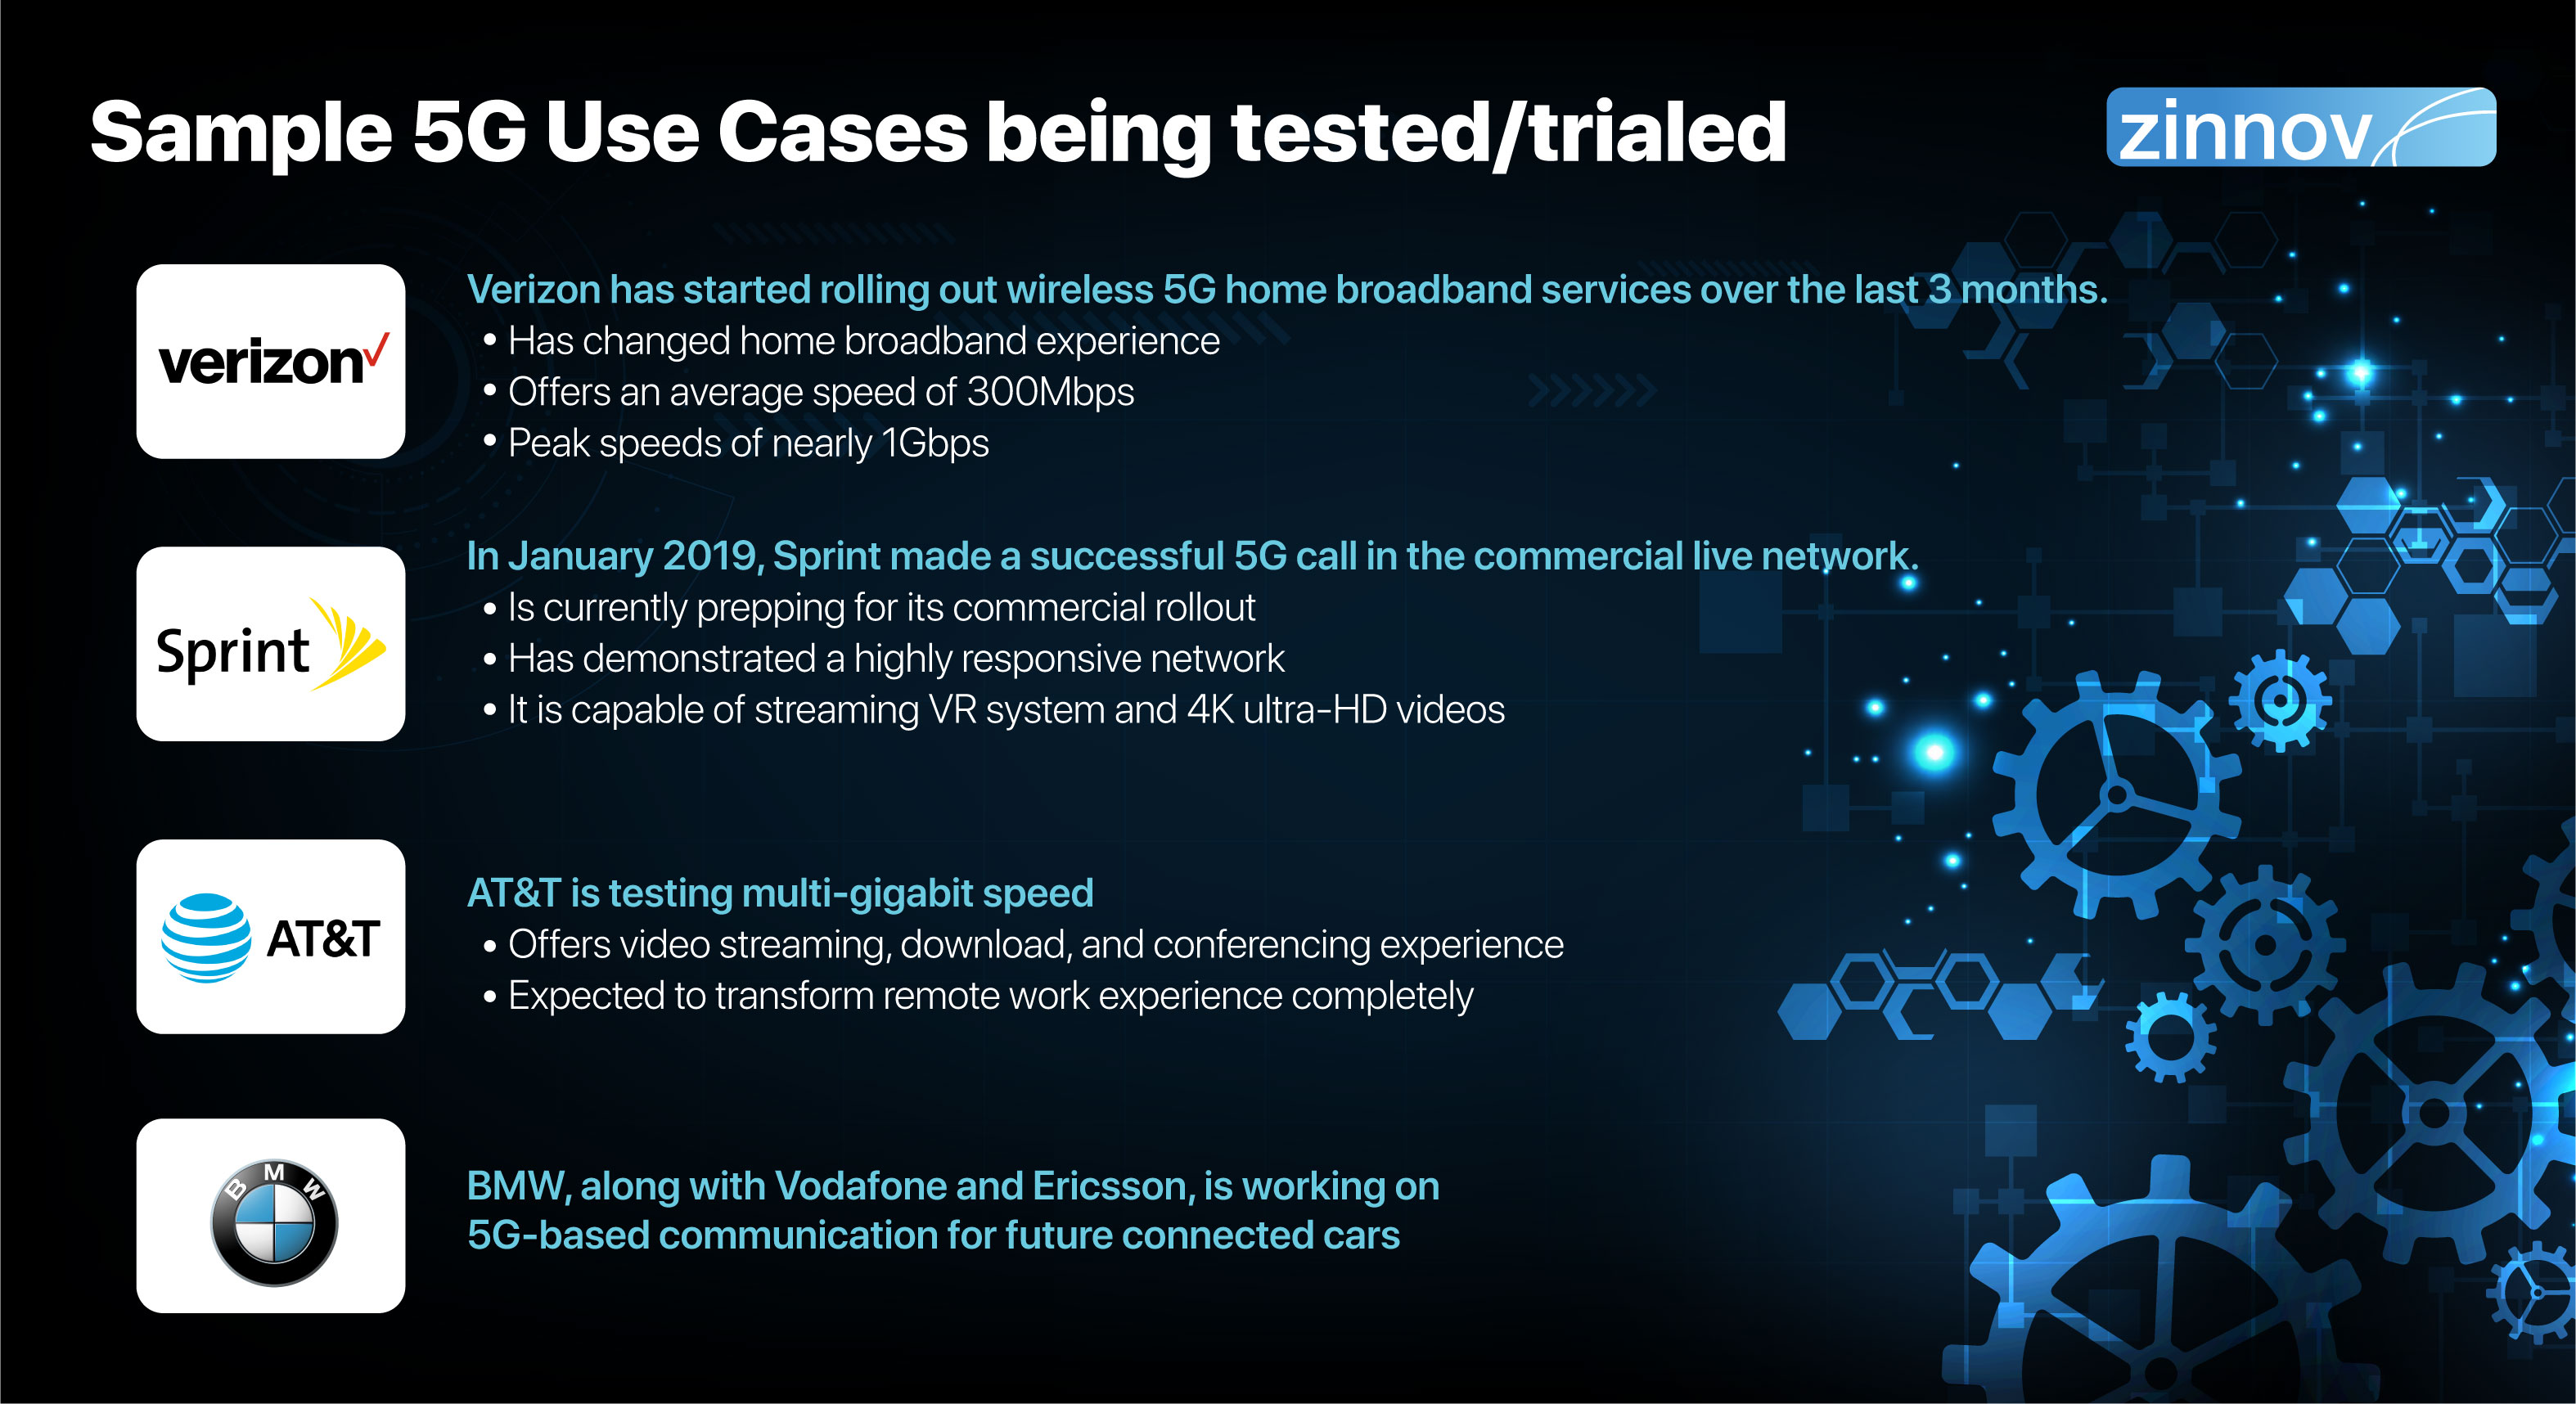 5G use cases being tested and trailed